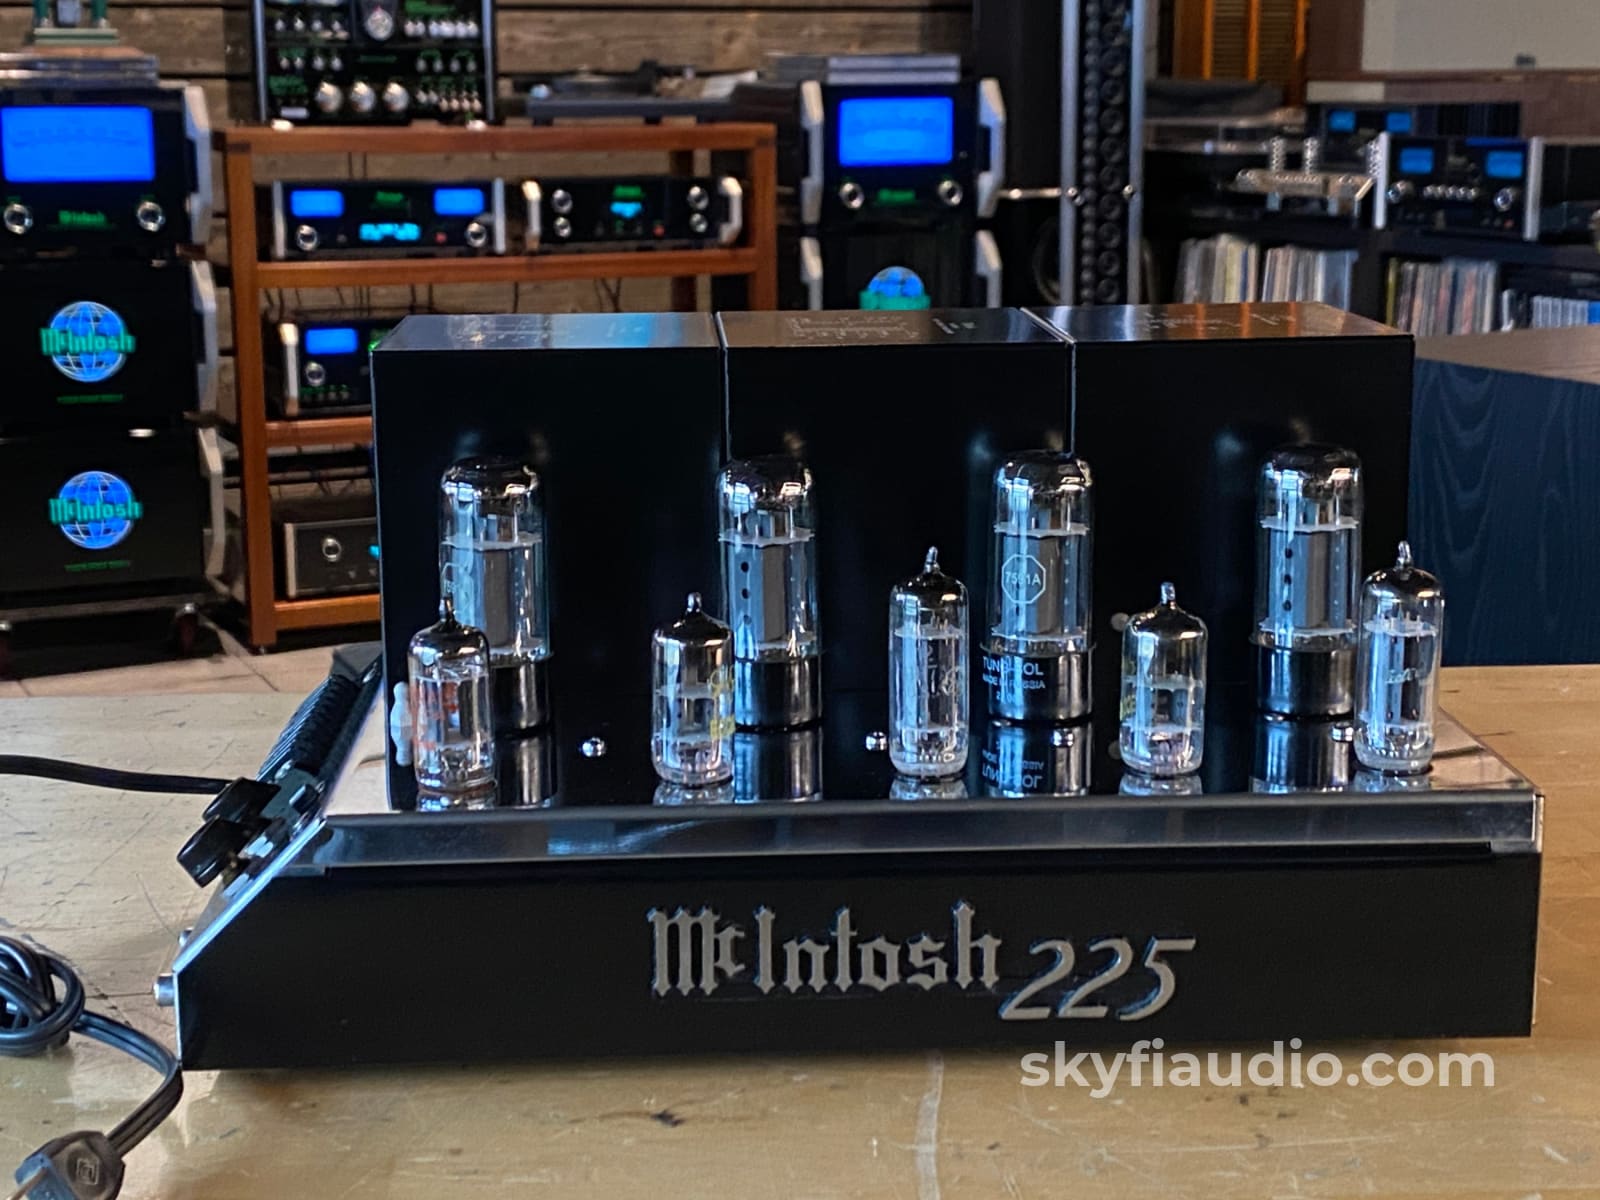 Mcintosh Mc225 Vintage Tube Amplifier From Abkco Music & Records - The Rolling Stones And More!